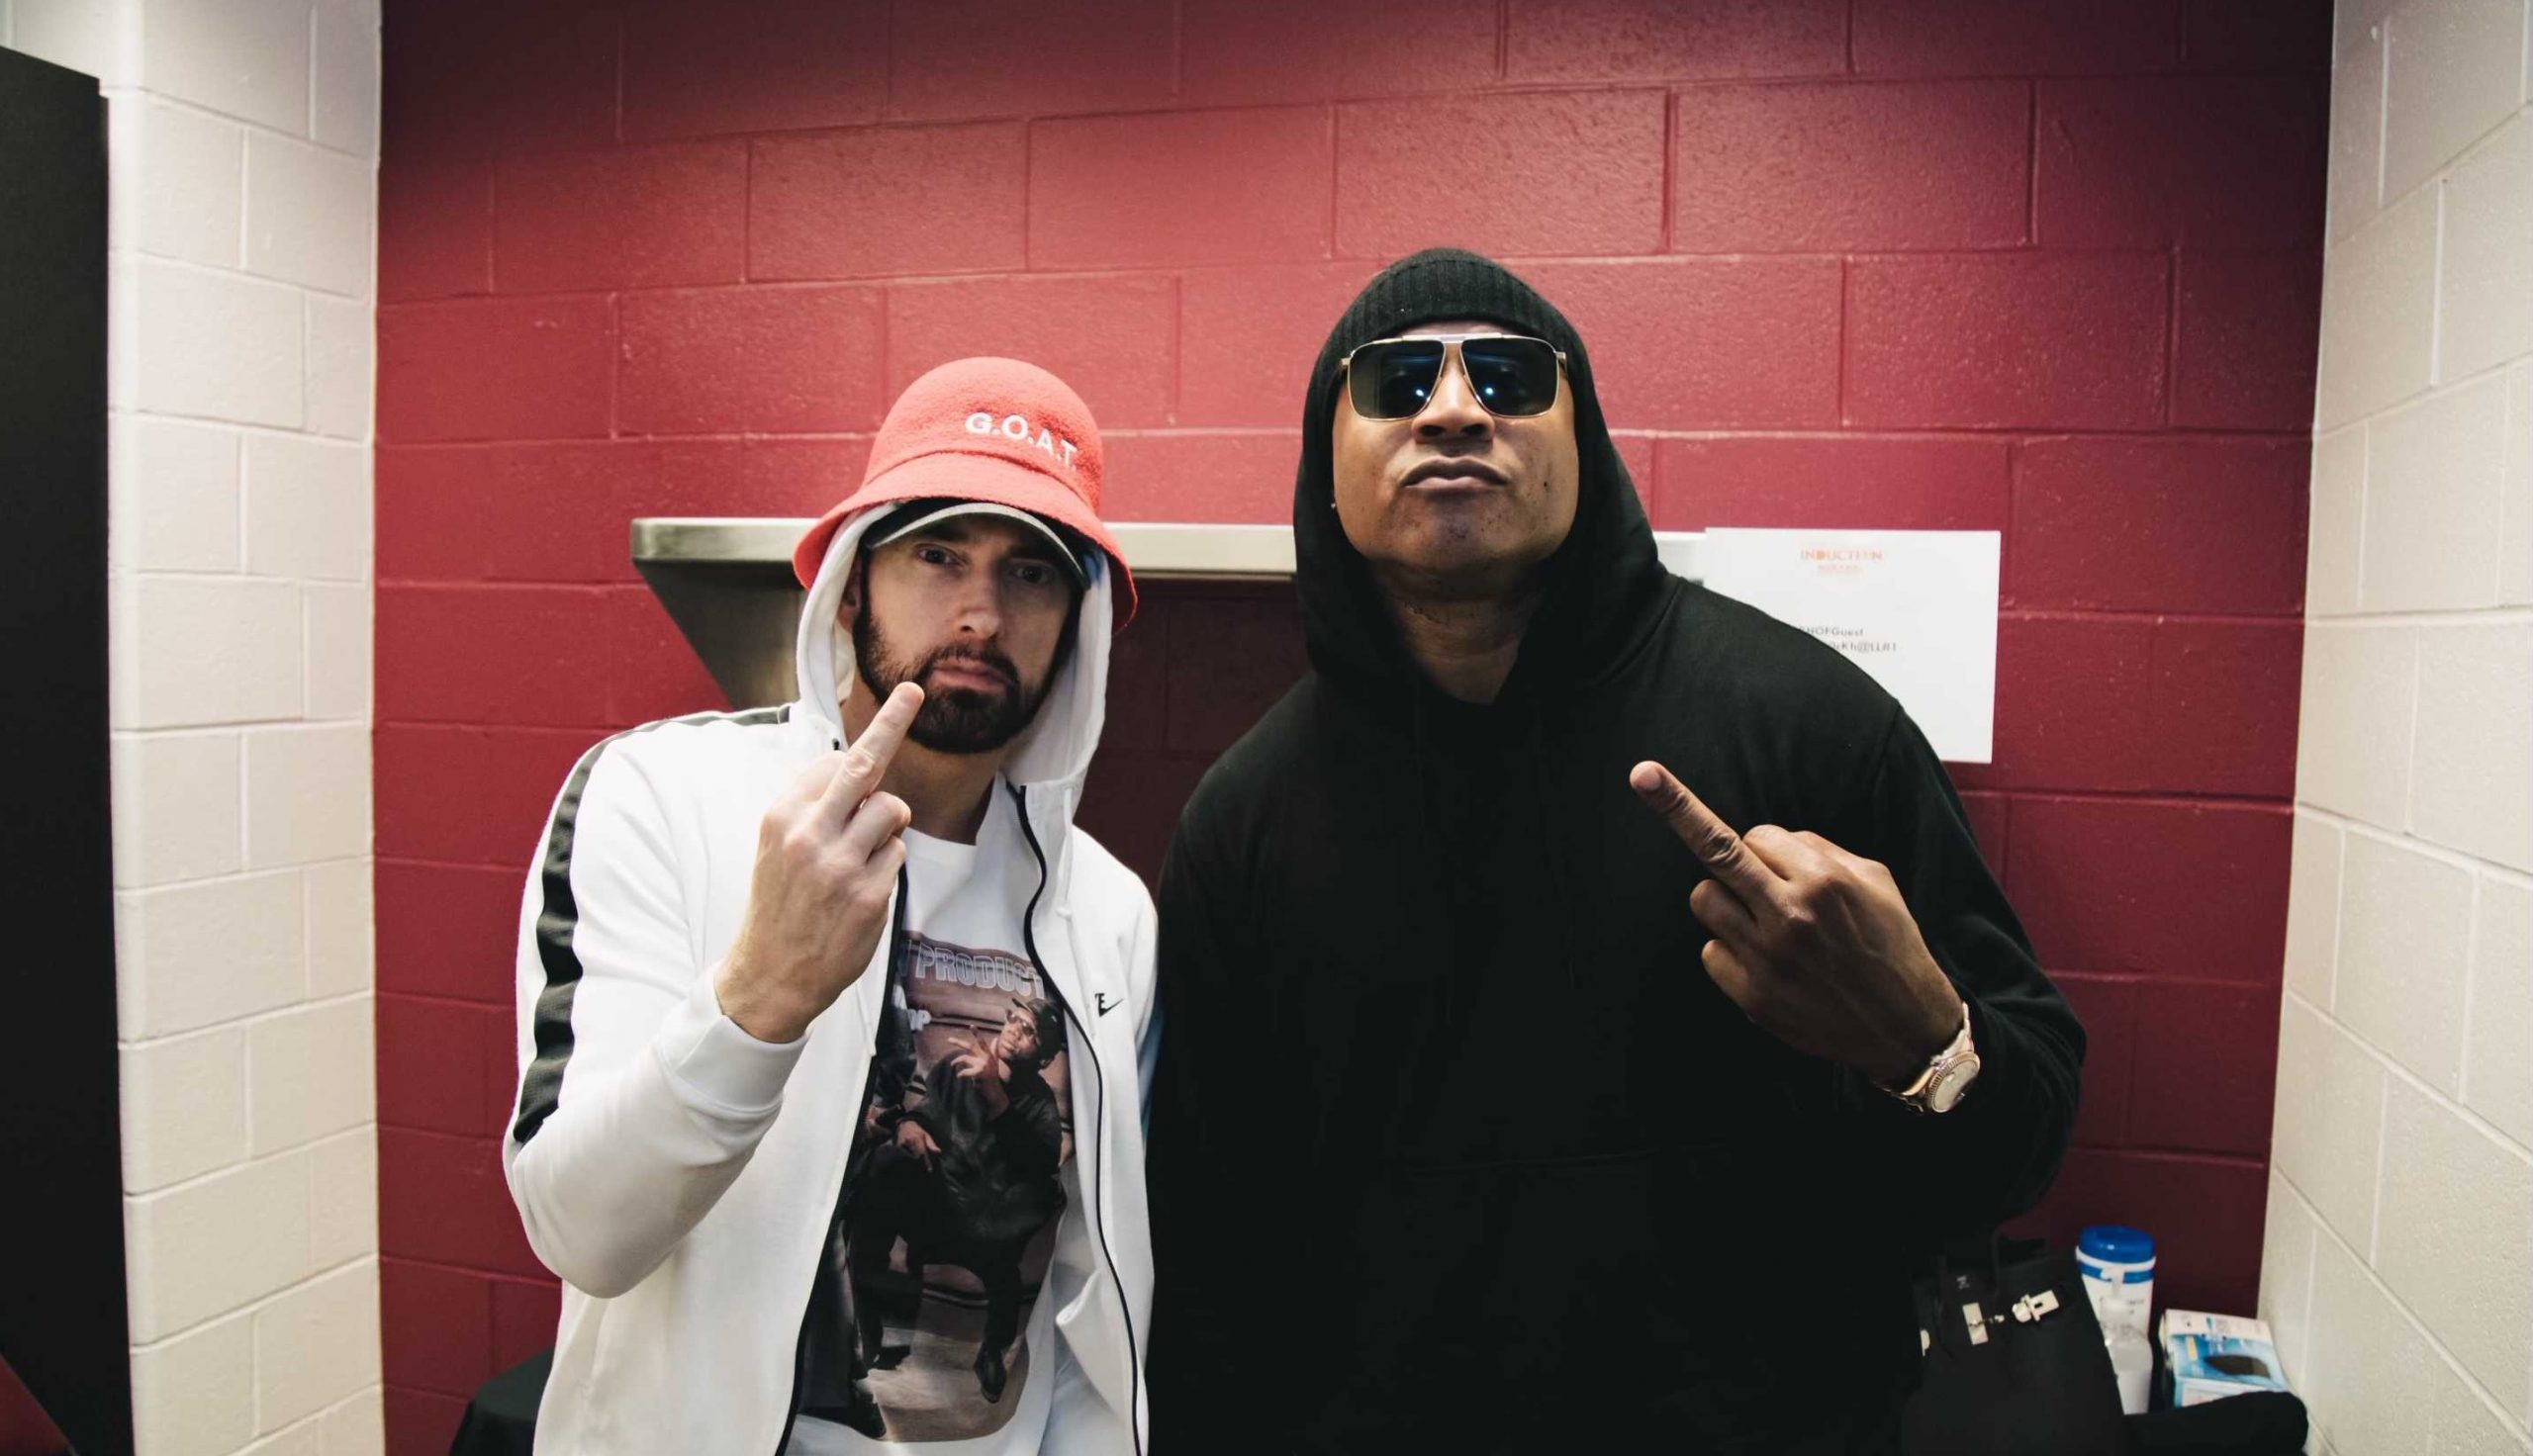 ll-cool-j-eminem-hbo-max-rock-and-roll-hall-of-fame